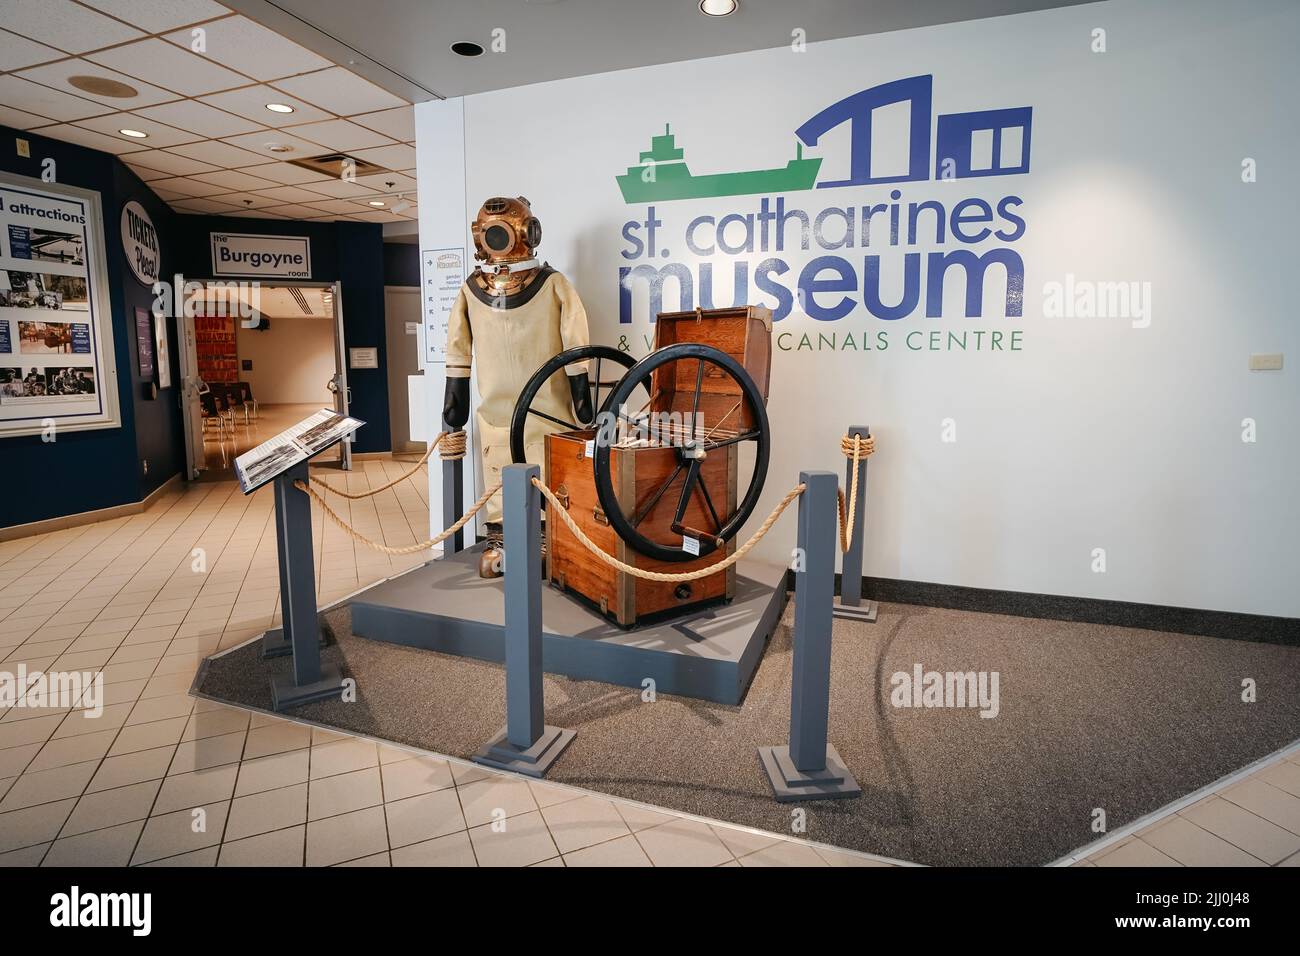 St. Catharines Museum & Welland Canals Centre, St Catharines, Ontario, Canada Stock Photo